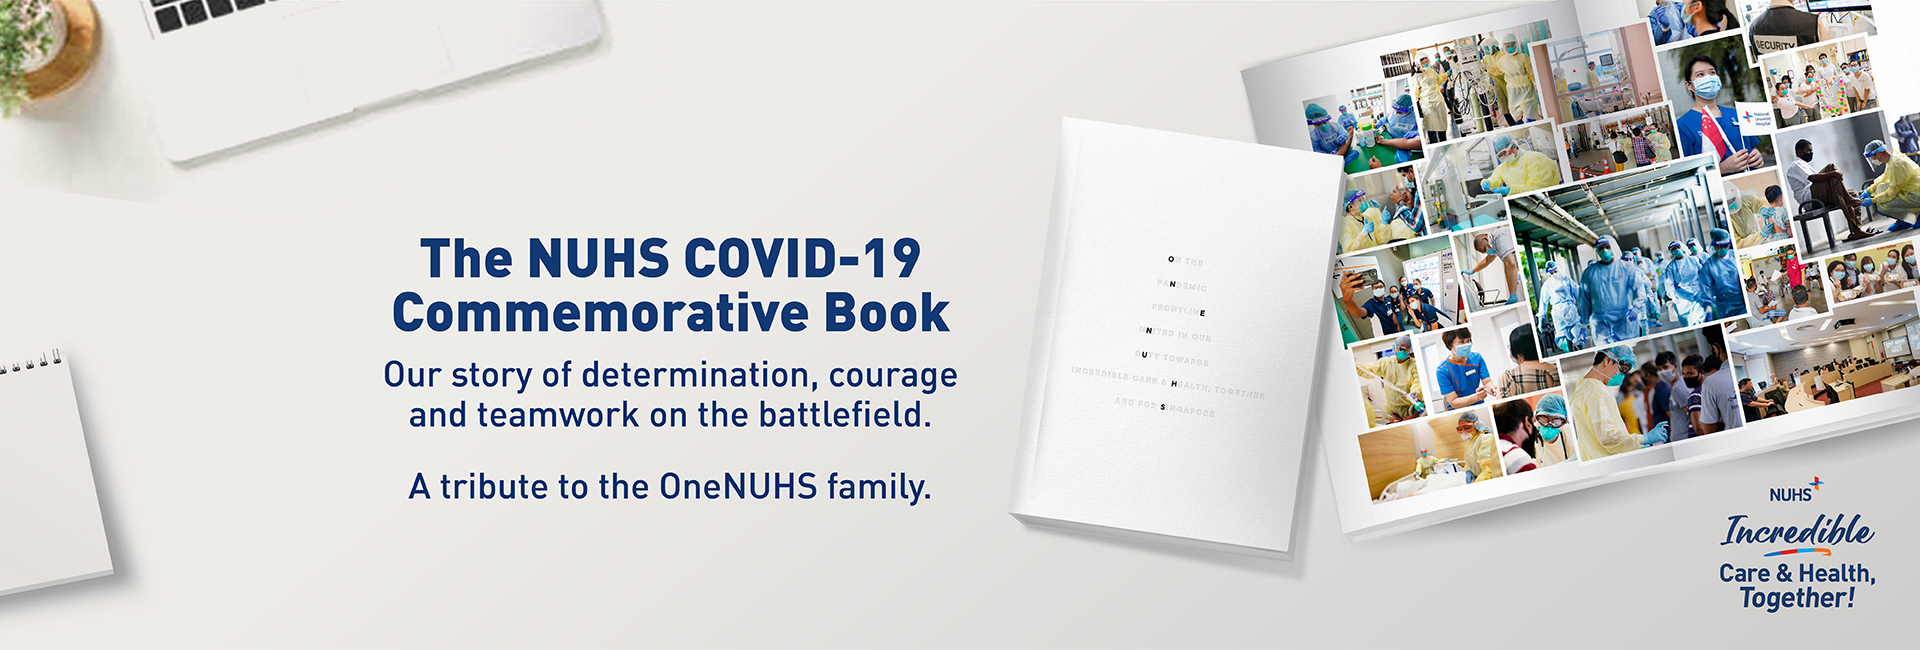 NUHS COVID-19 Commemorative Book - Our Story of Determination, Courage & Teamwork on the Pandemic Battlefield!